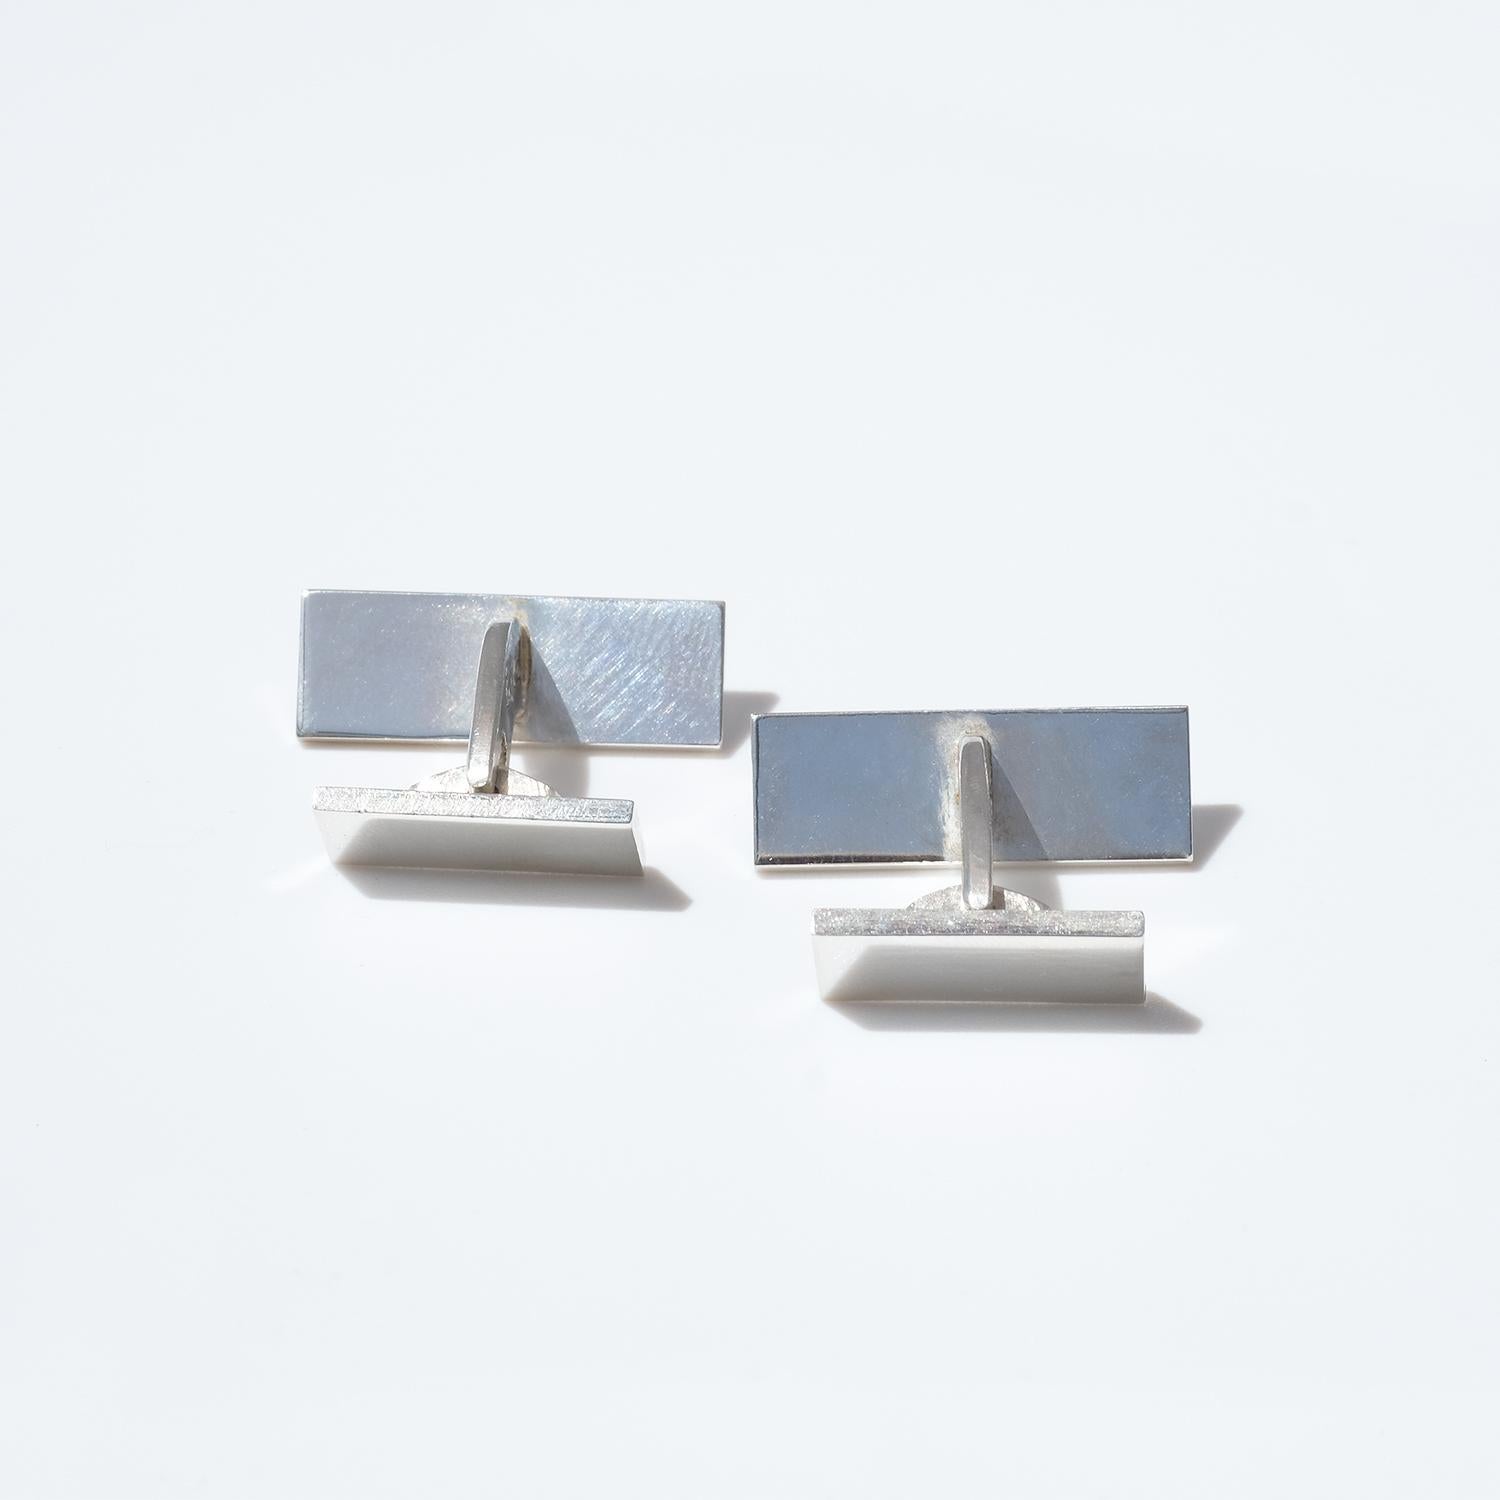 Pair of Silver Cufflinks Made by Wiwen Nilsson, Sweden in 1961 For Sale 5